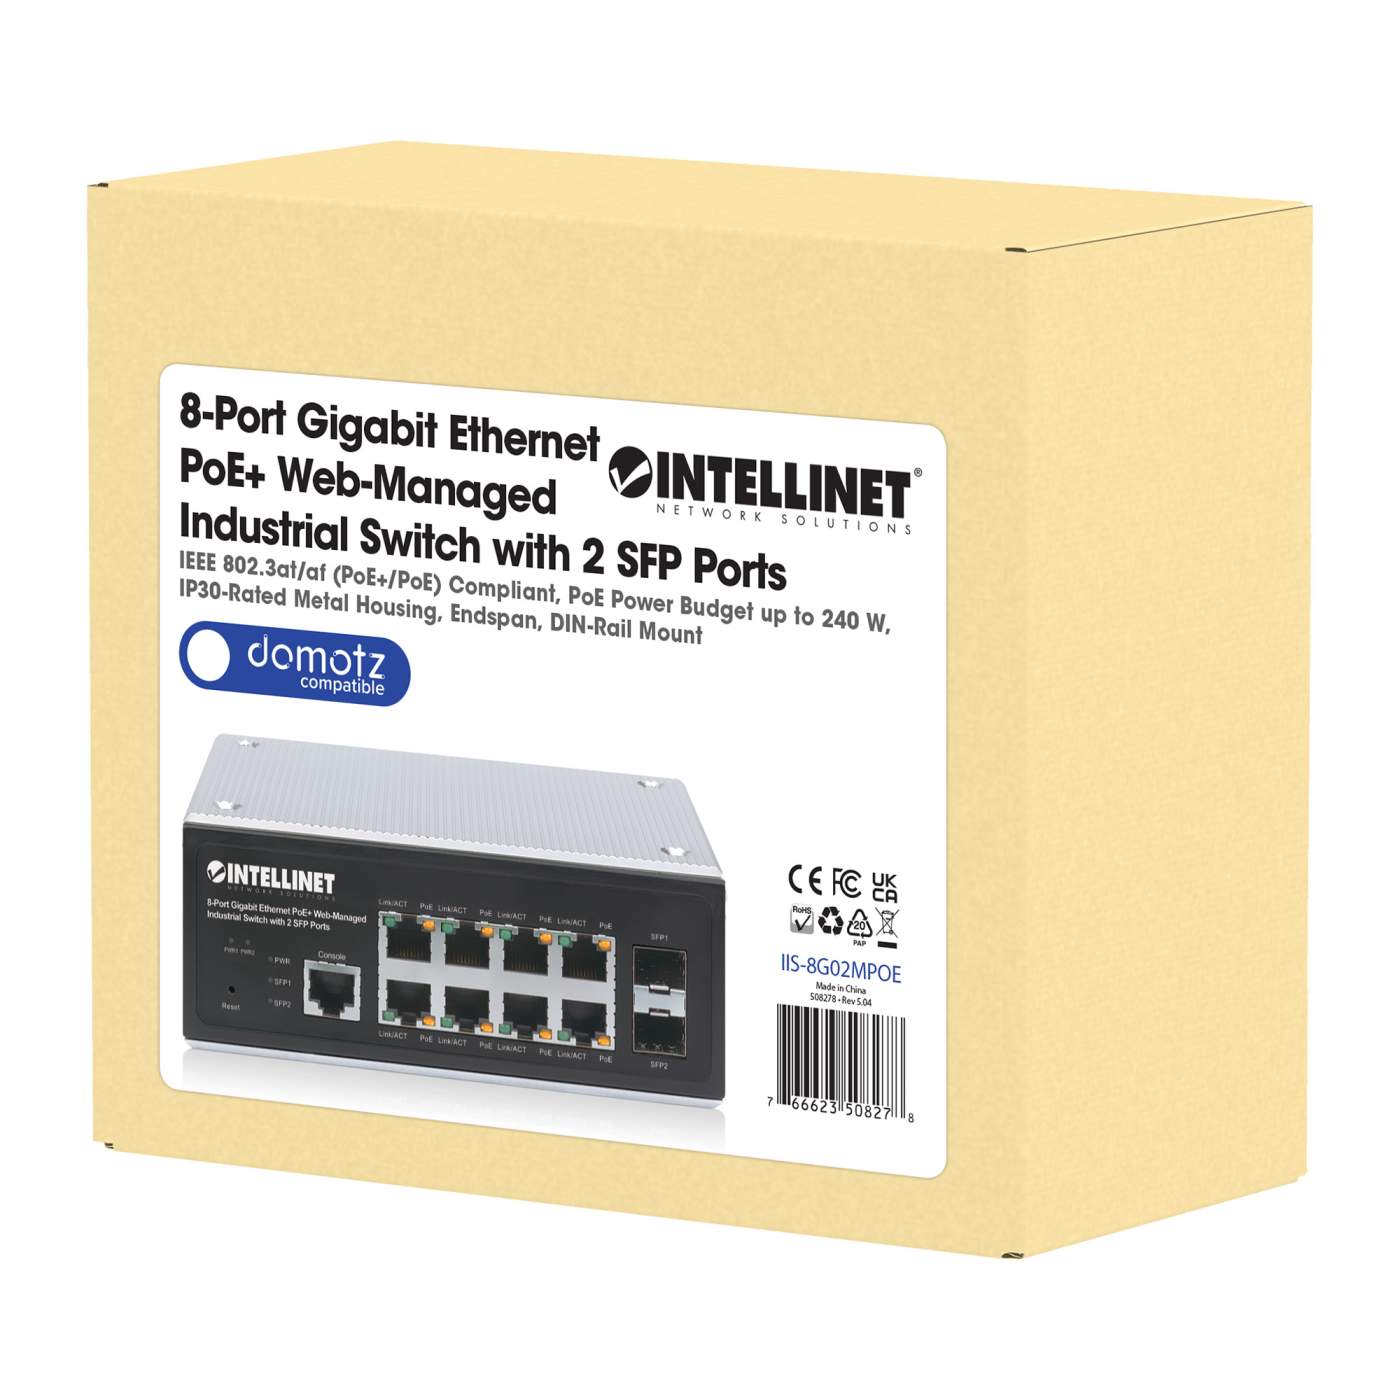 Industrial 8-Port Gigabit Ethernet PoE+ Layer 2+ Web-Managed Switch with 2 SFP Ports Packaging Image 2